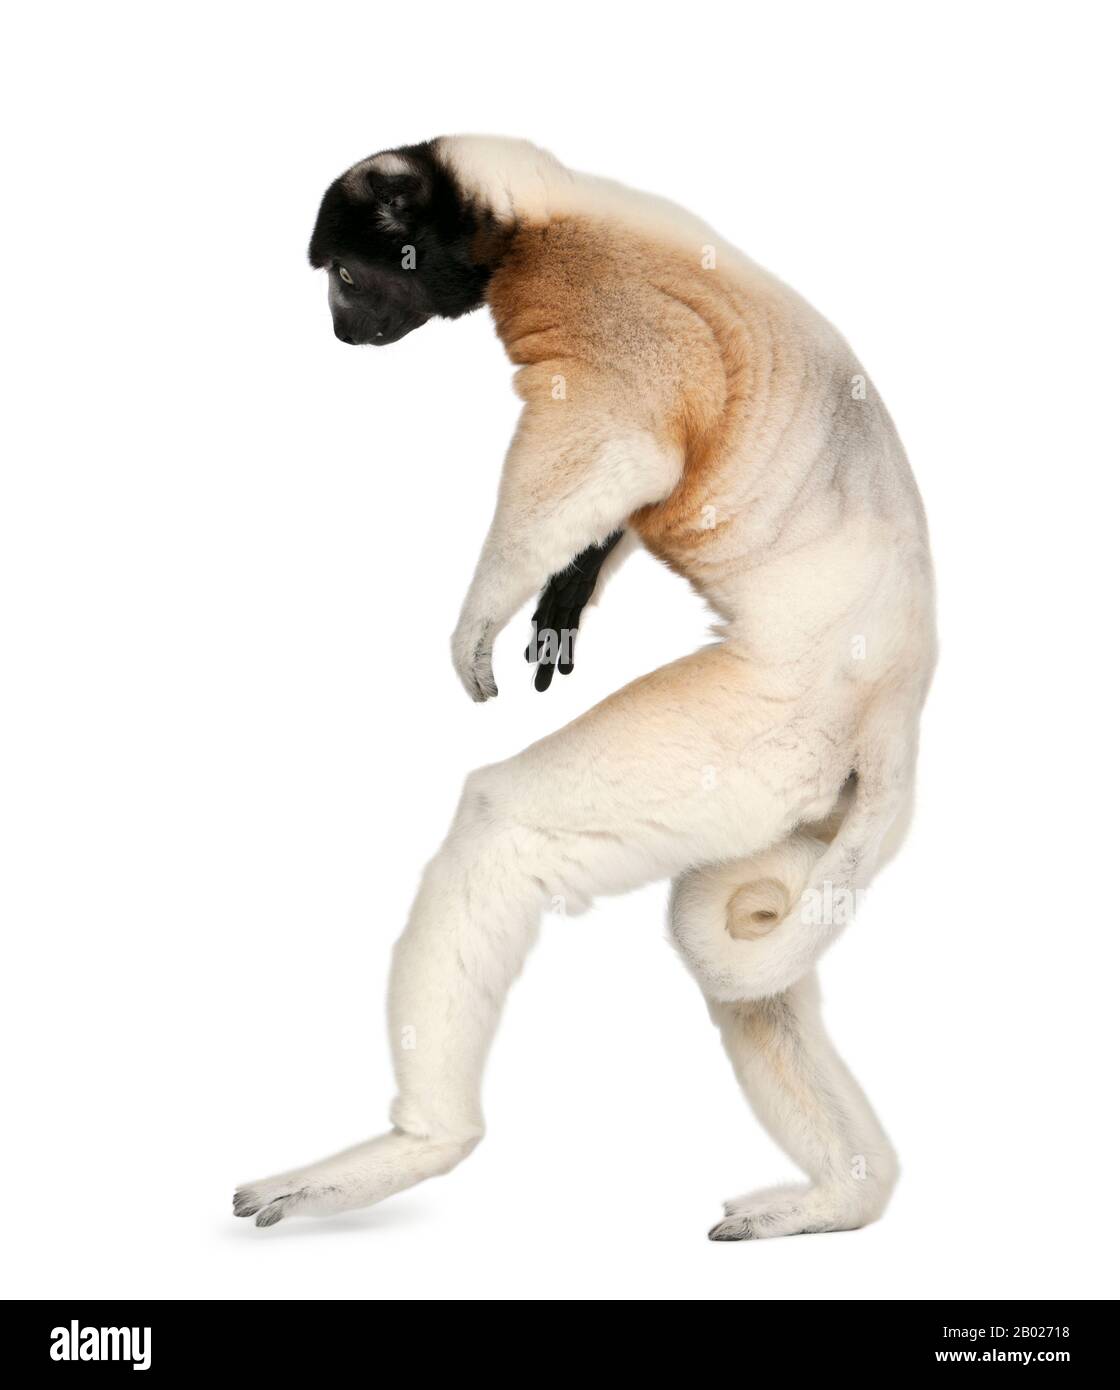 Crowned Sifaka, Propithecus coronatus, 14 years old, walking in front of white background Stock Photo